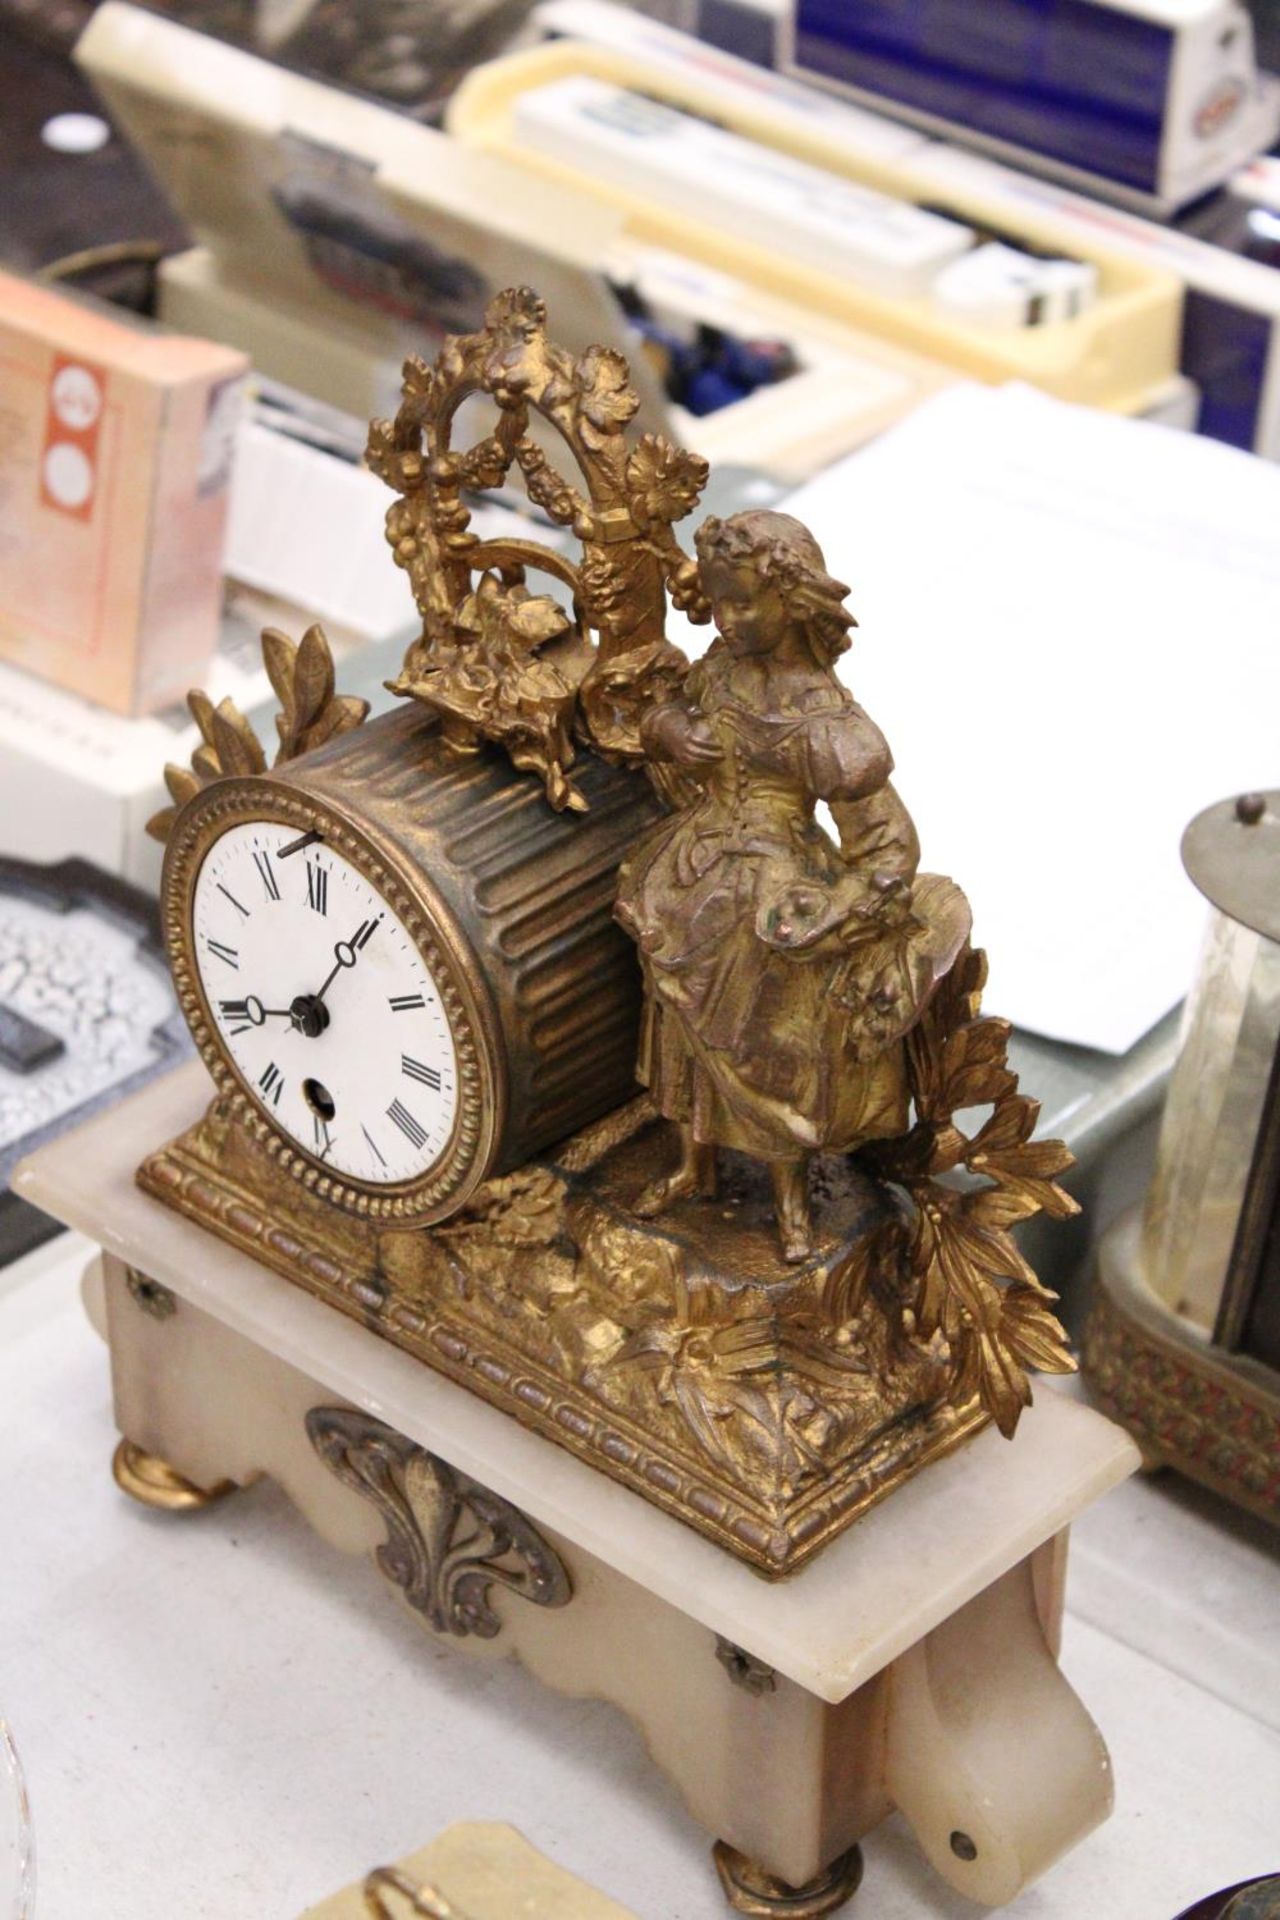 A LATE 19TH CENTURY, FRENCH, GILT MANTLE CLOCK, WITH FIGURE DESIGN - Image 3 of 6